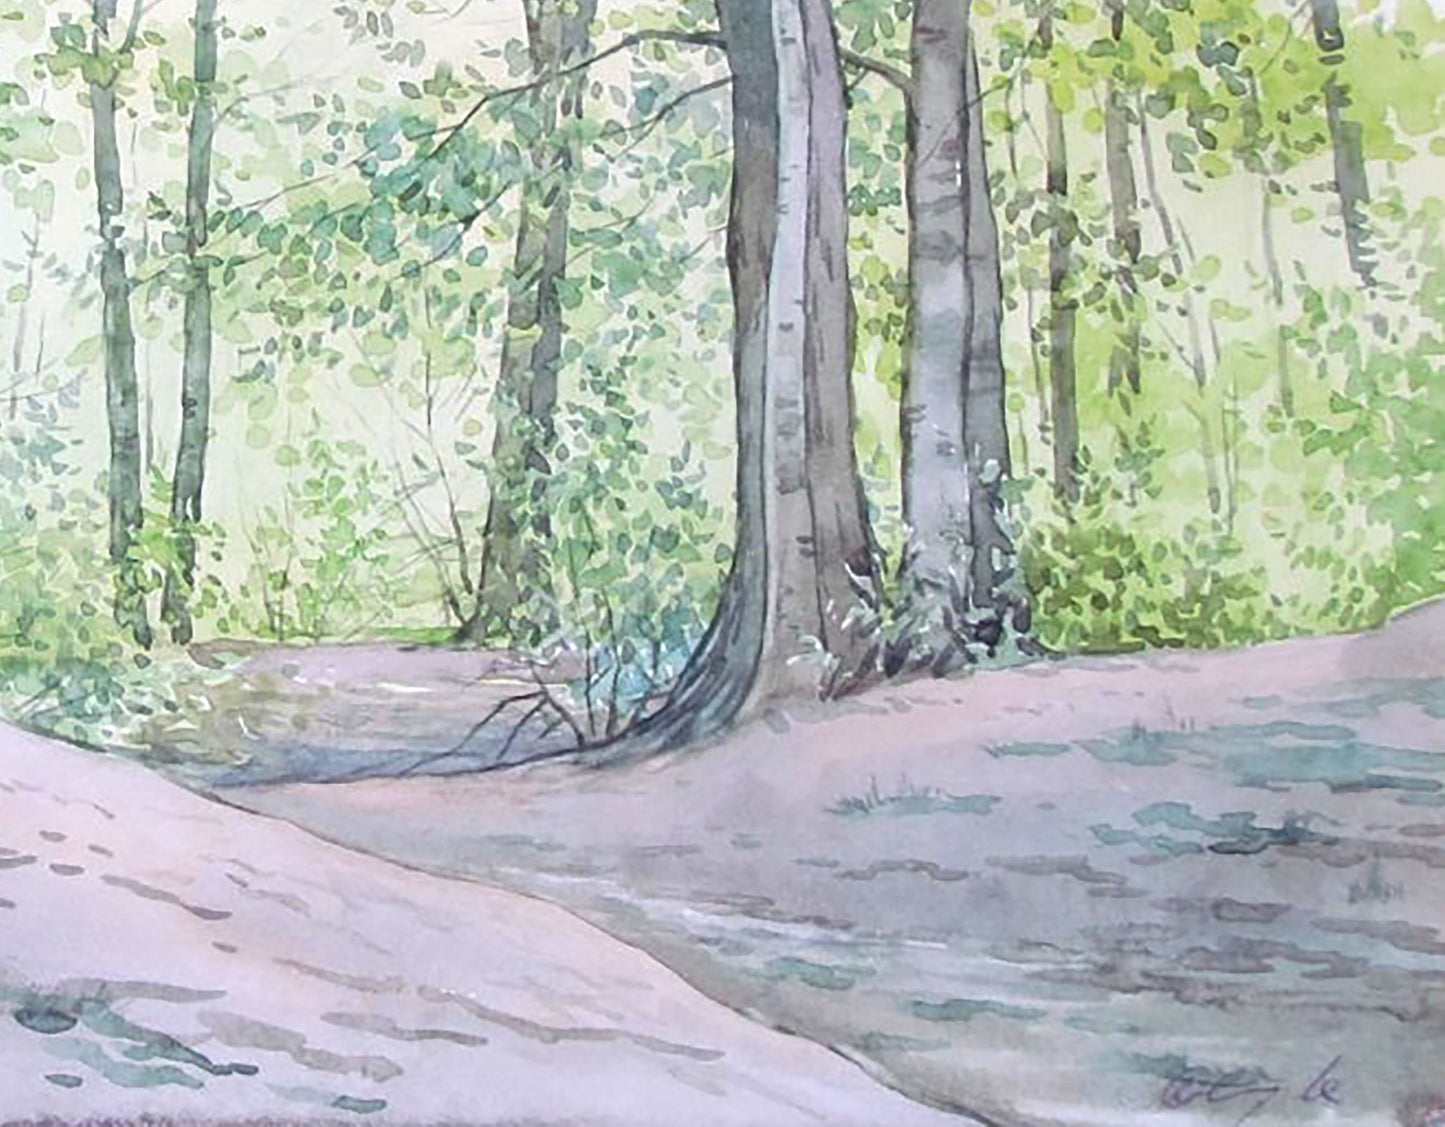 Watercolor painting Warm and sunny day in the forest Valery Savenets